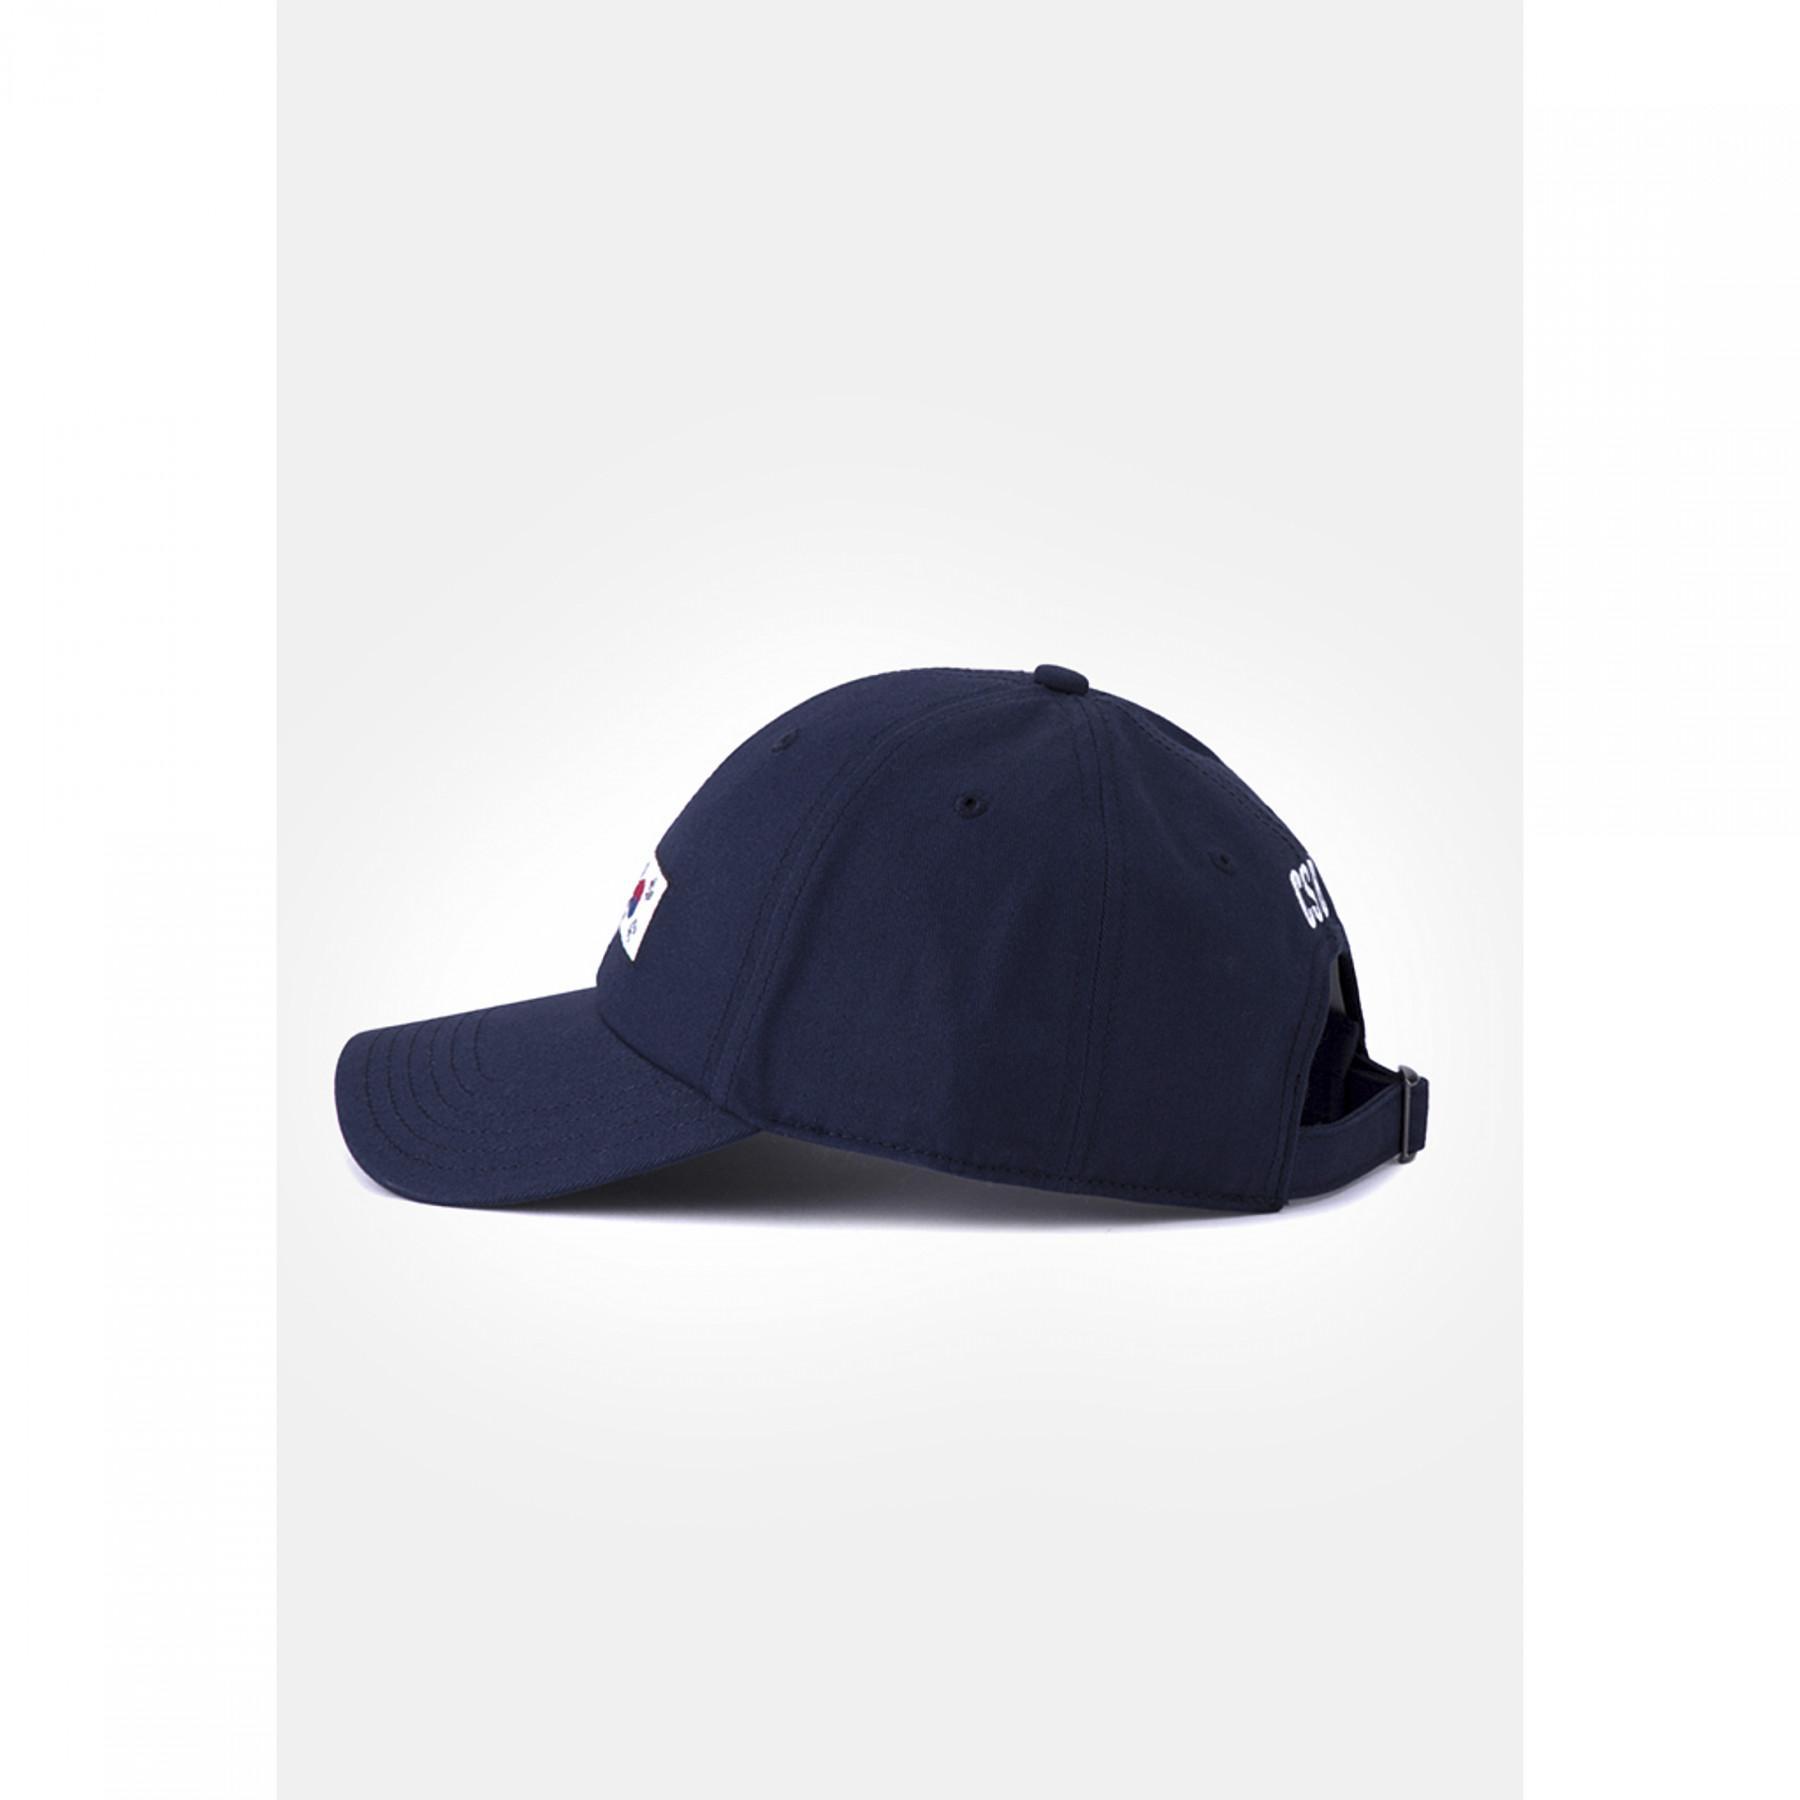 Casquette Cayler&Sons 9664 curved